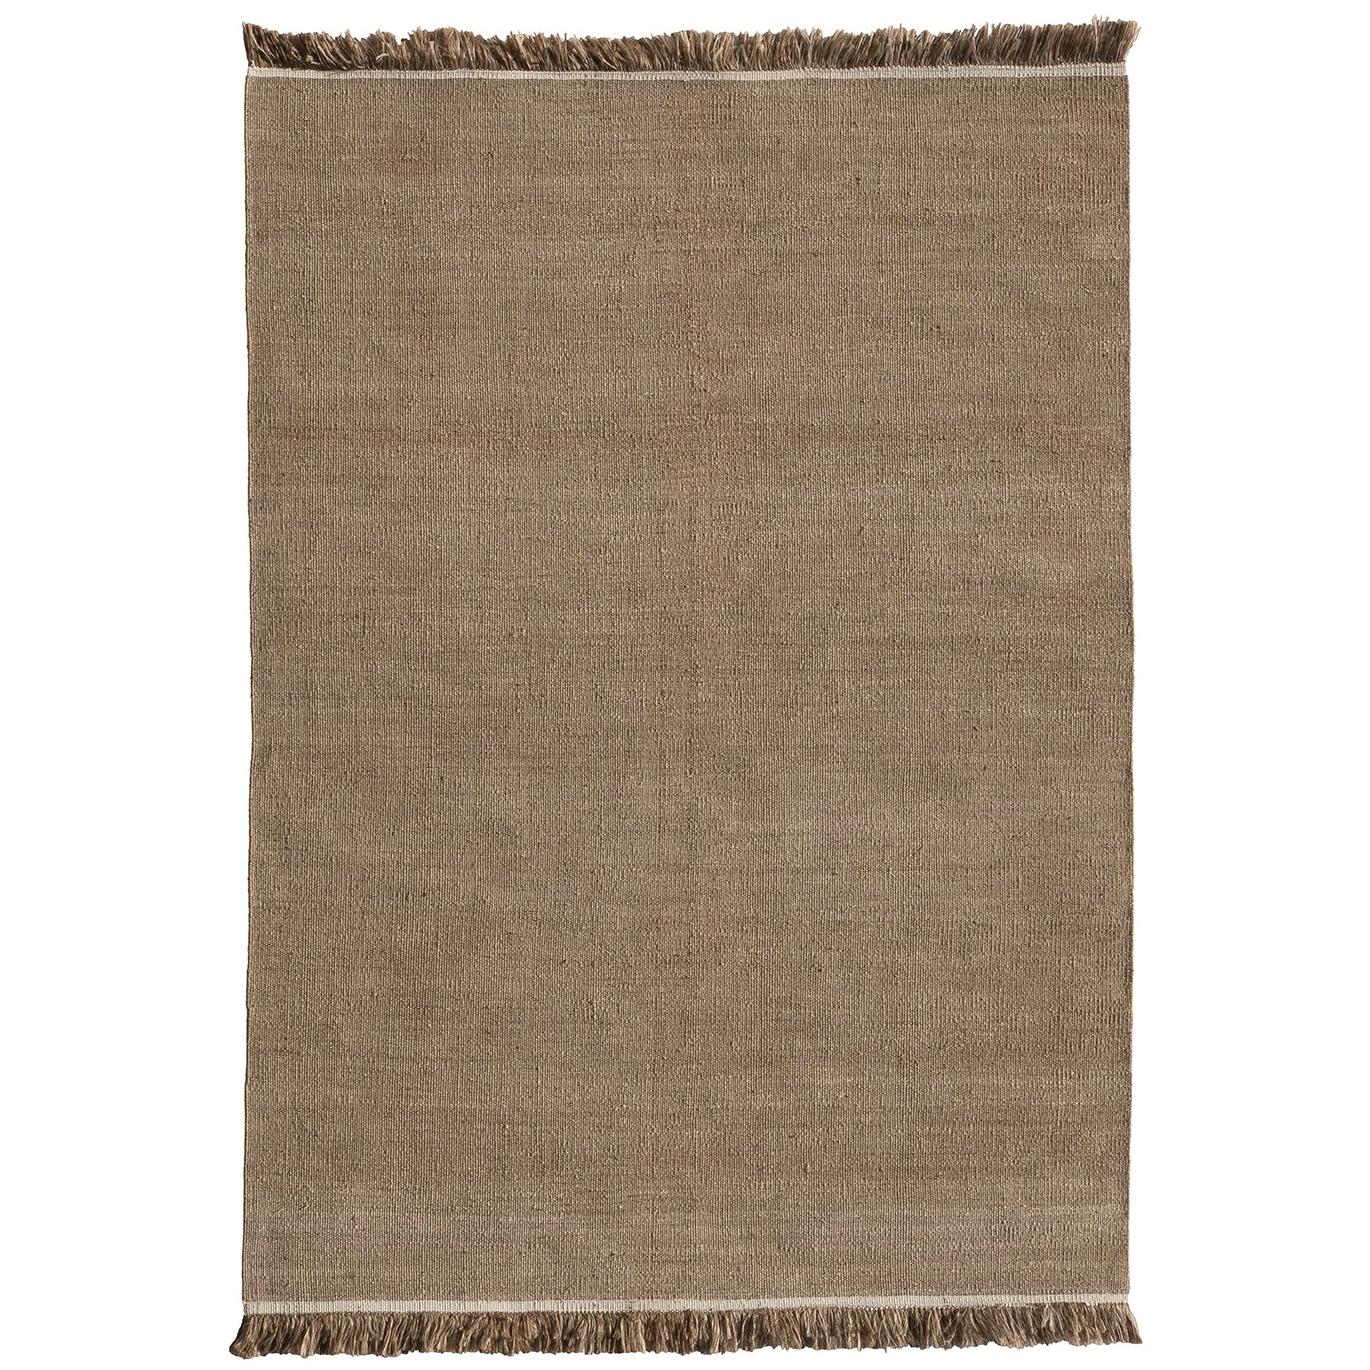 Nanimarquina Wellbeing Nettle Dhurrie Medium Rug by Ilse Crawford, Small